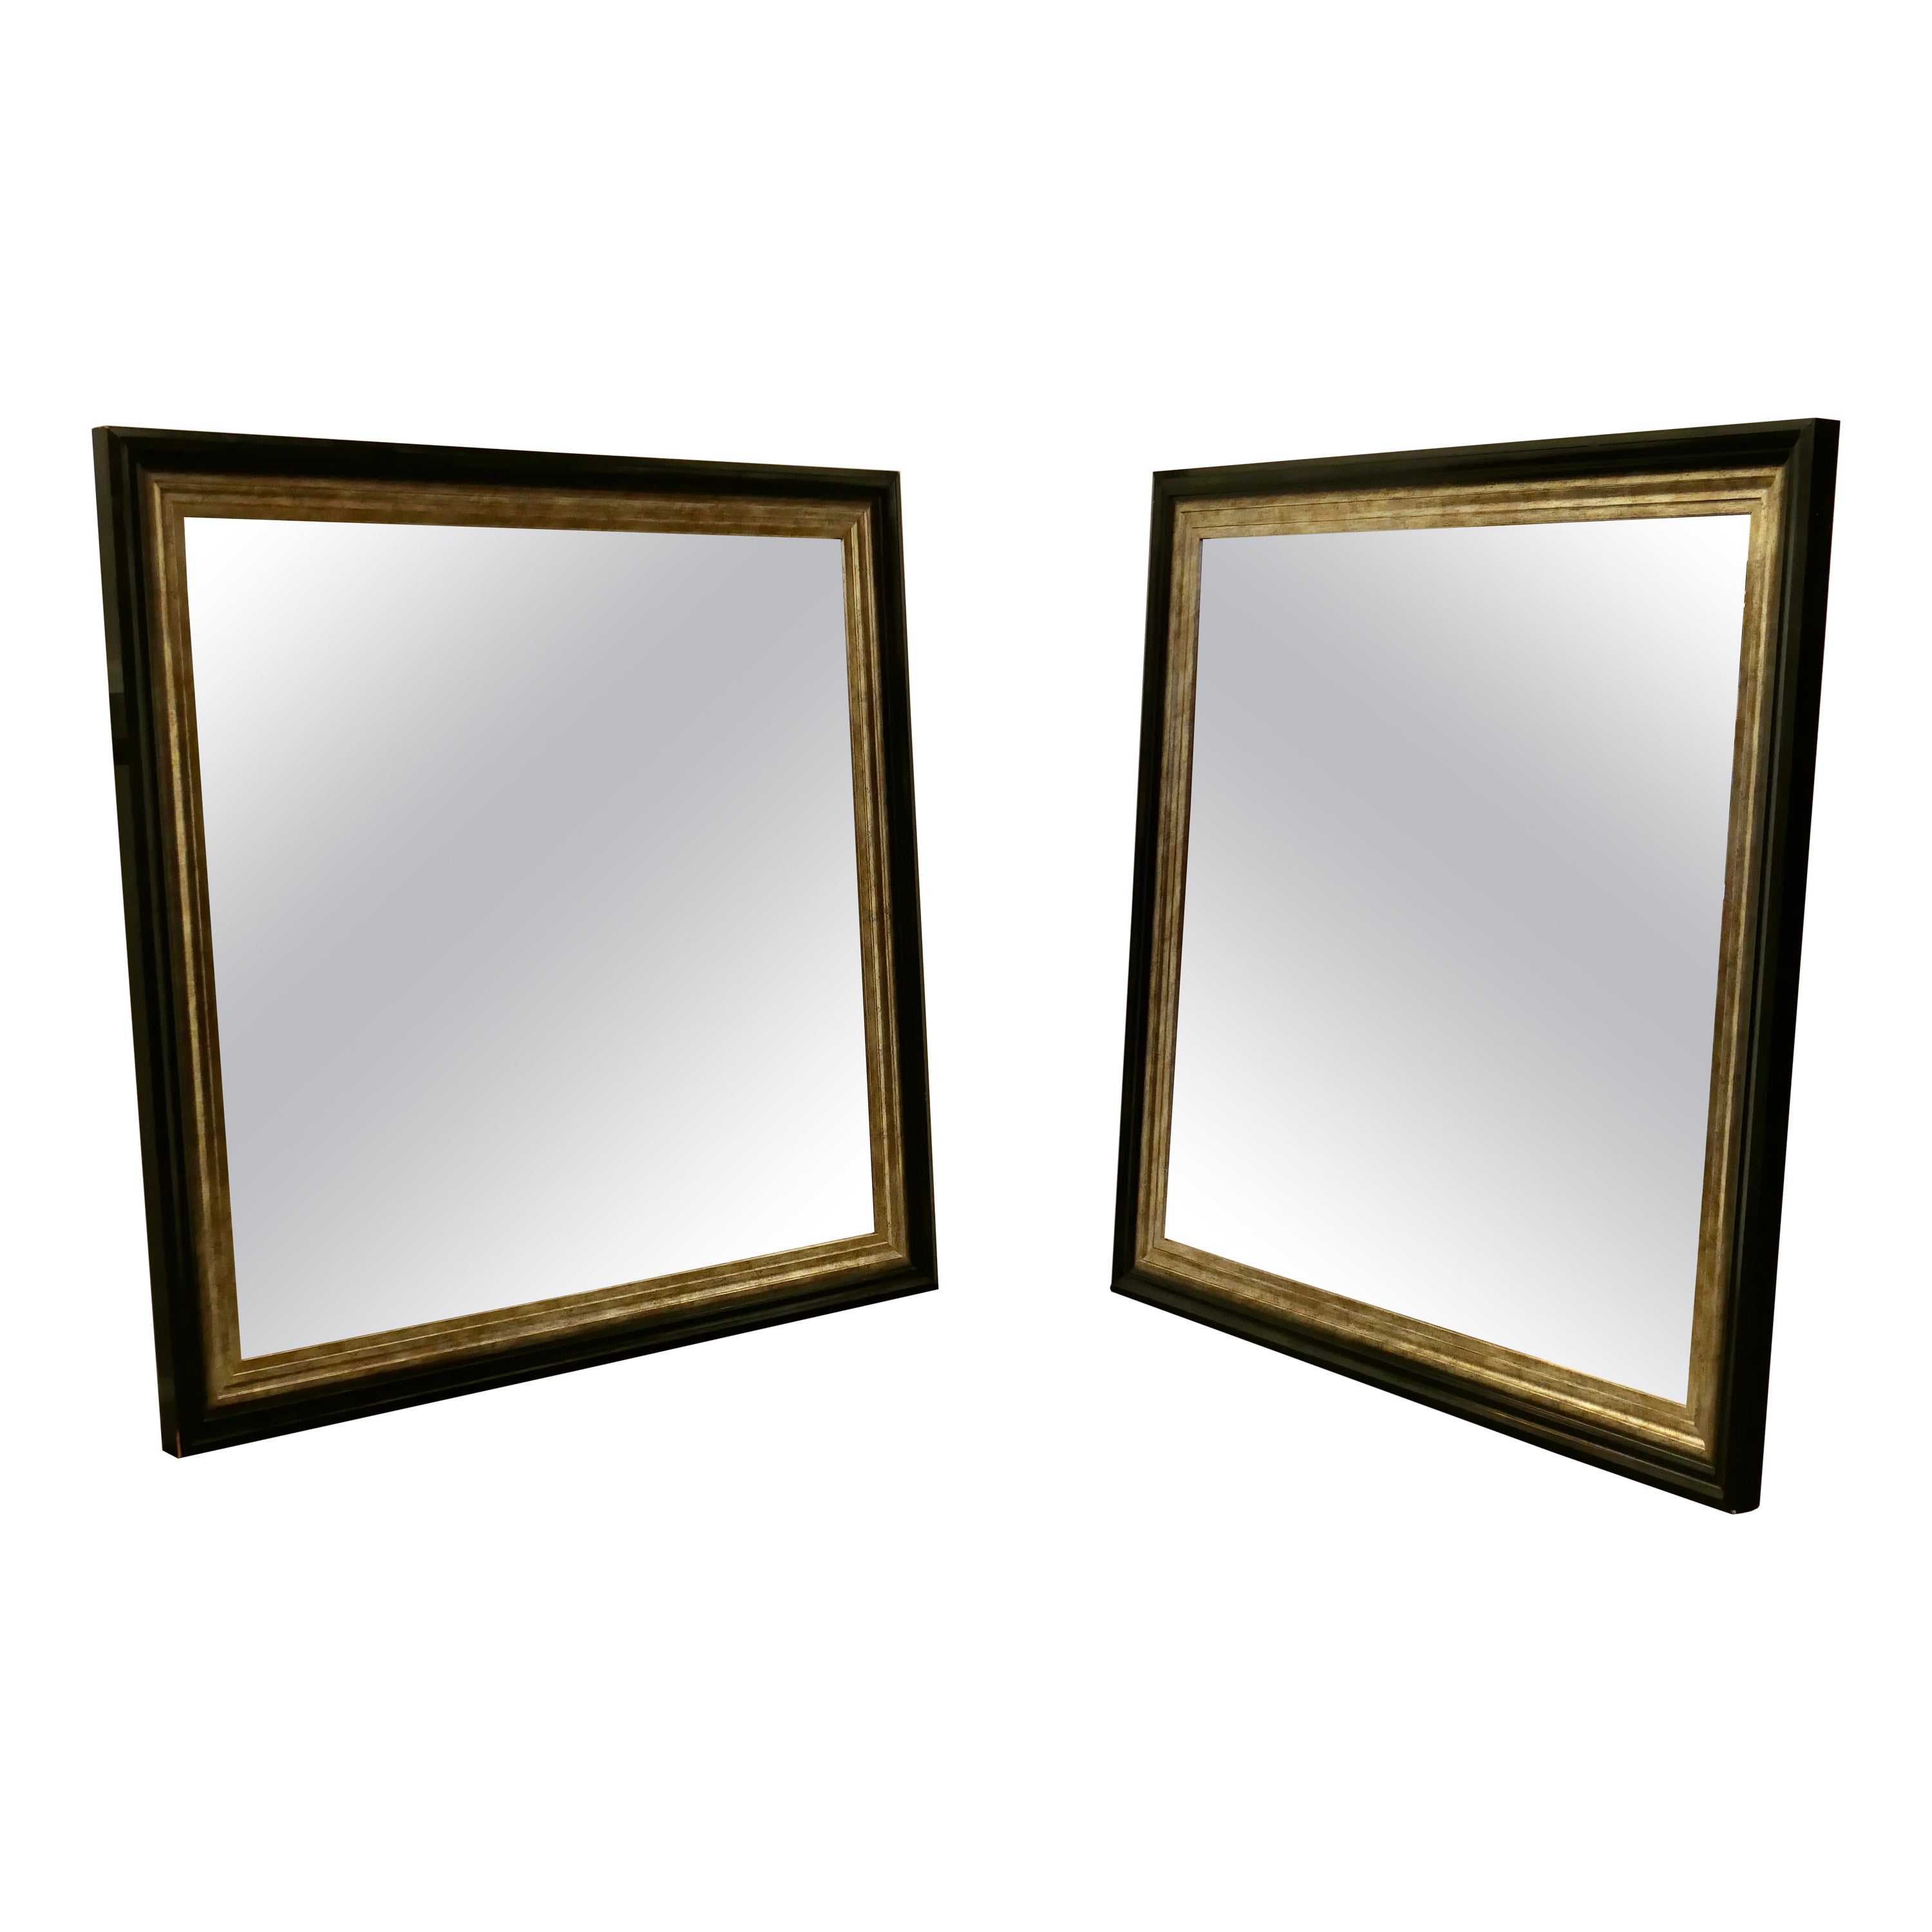 Pair of Large Rectangular Wall Mirrors For Sale